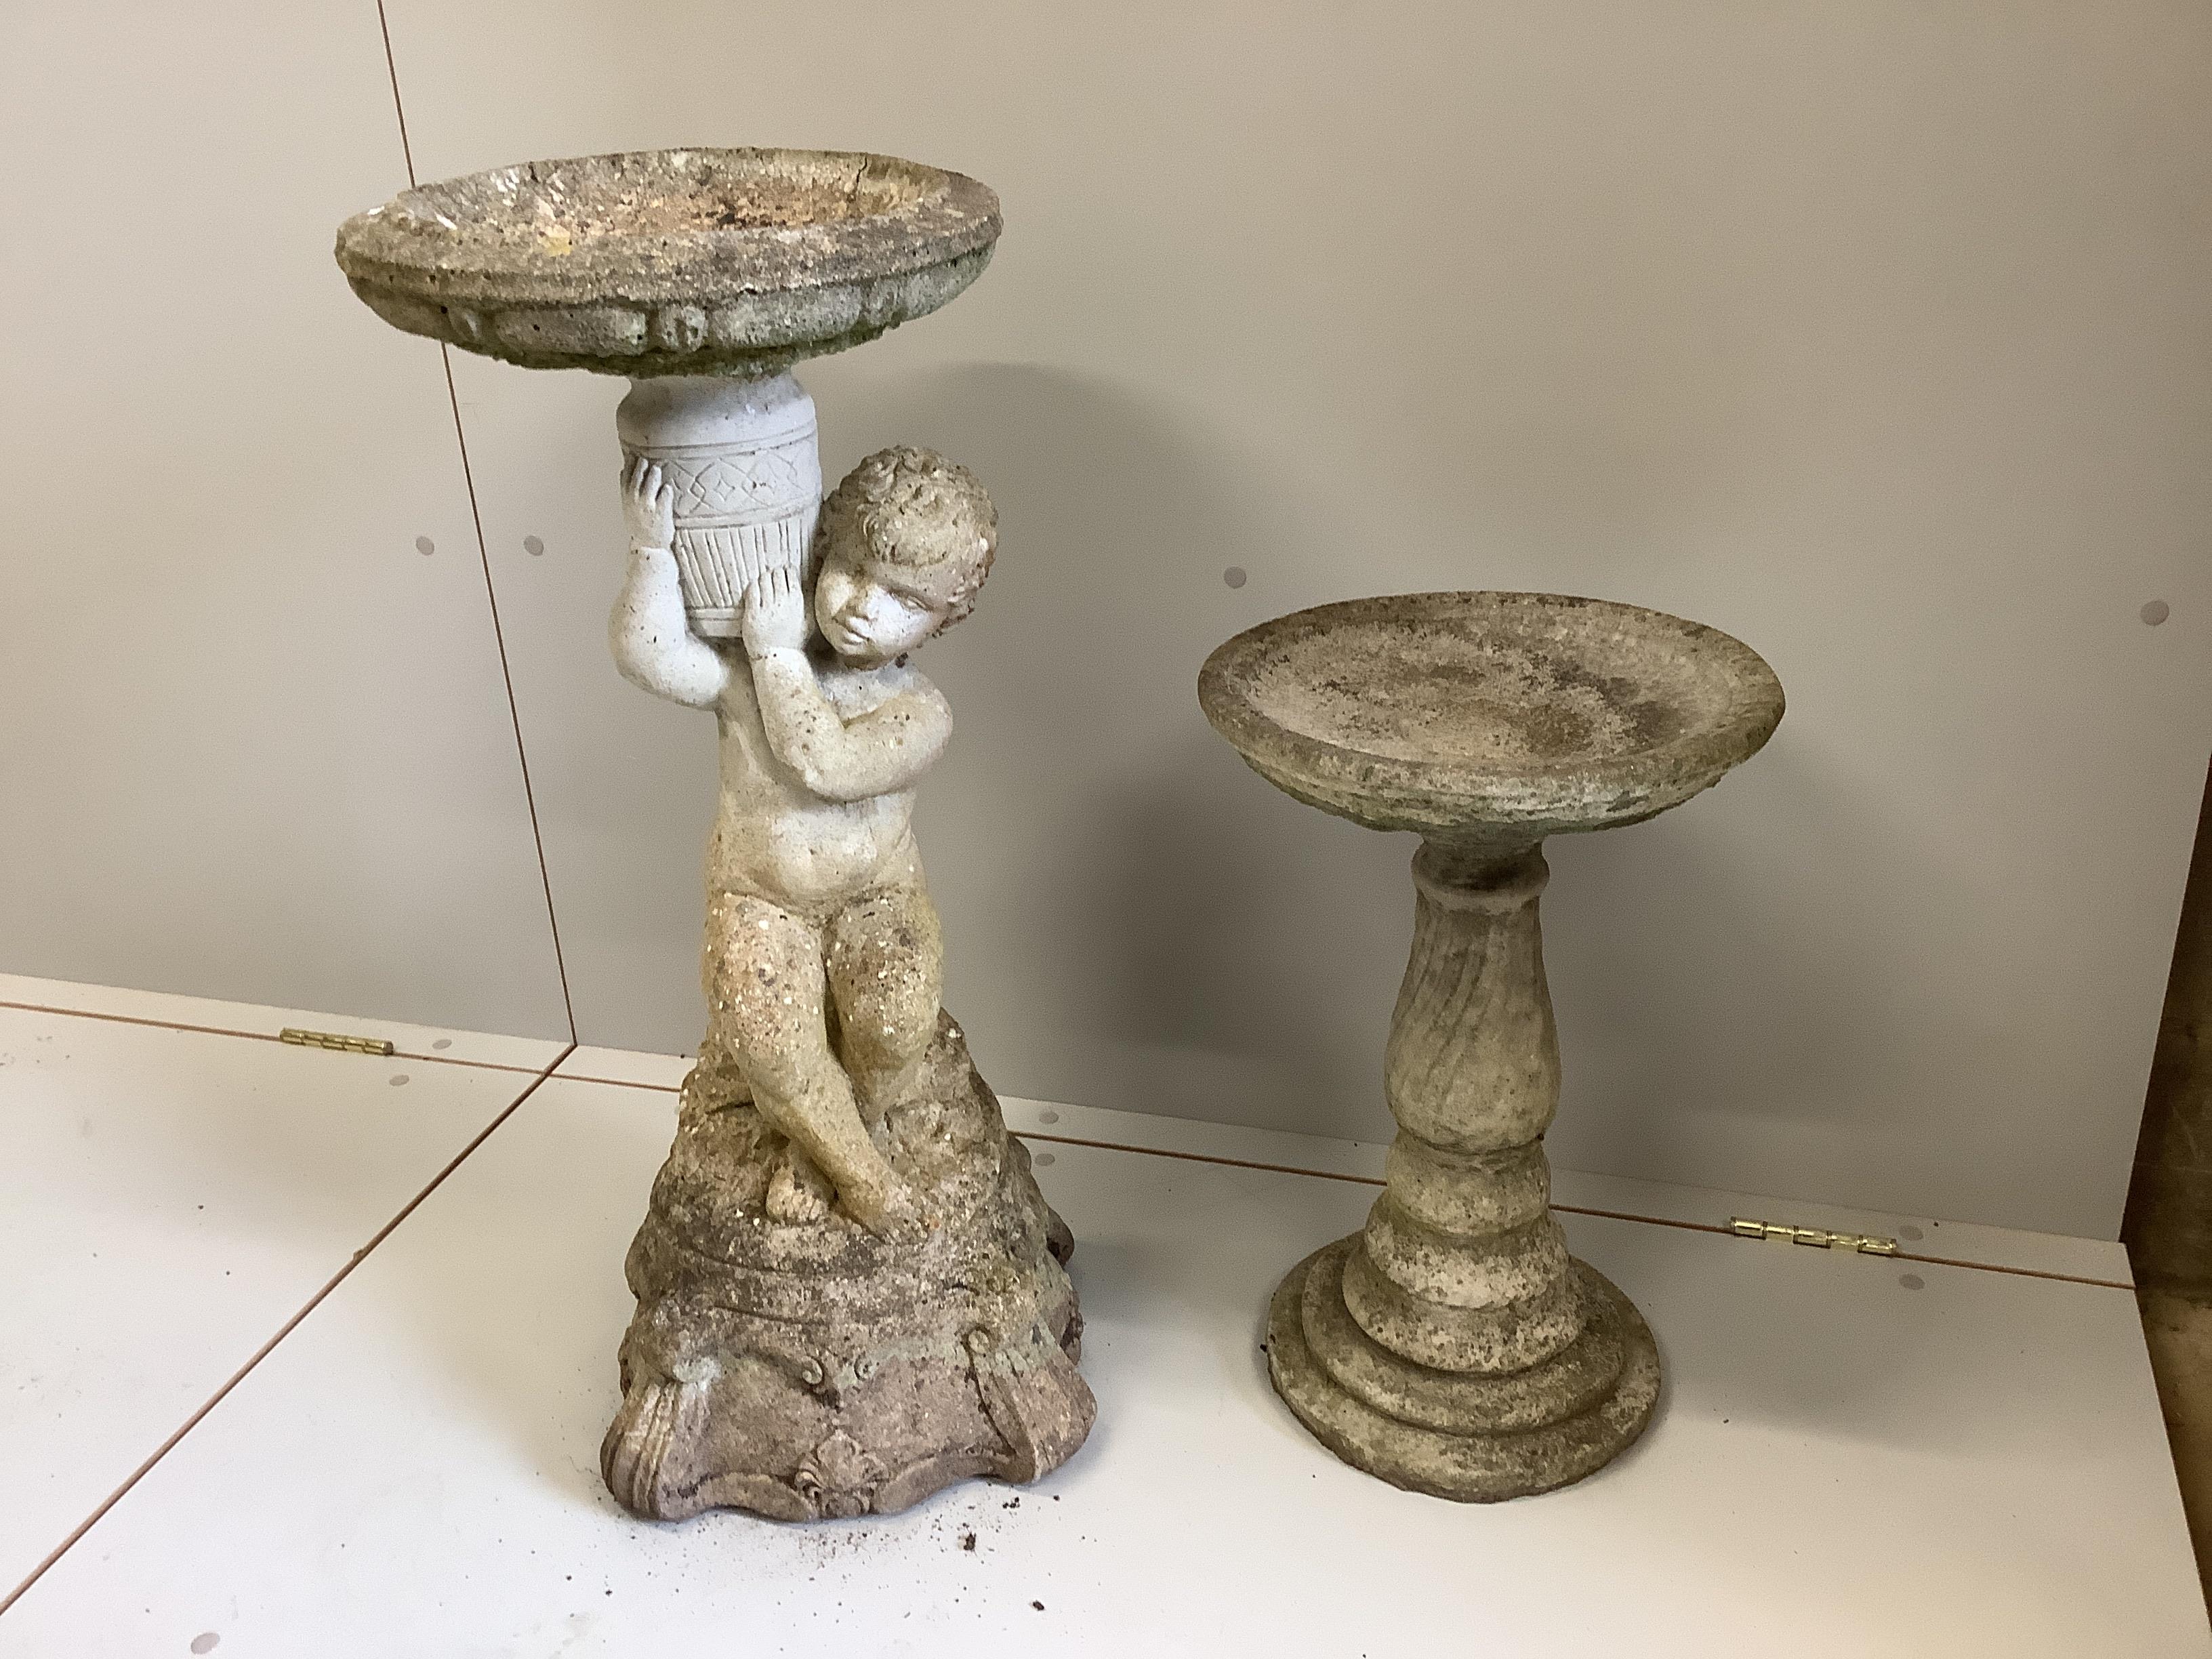 Two weathered reconstituted stone bird baths, weathered, larger height 76cm